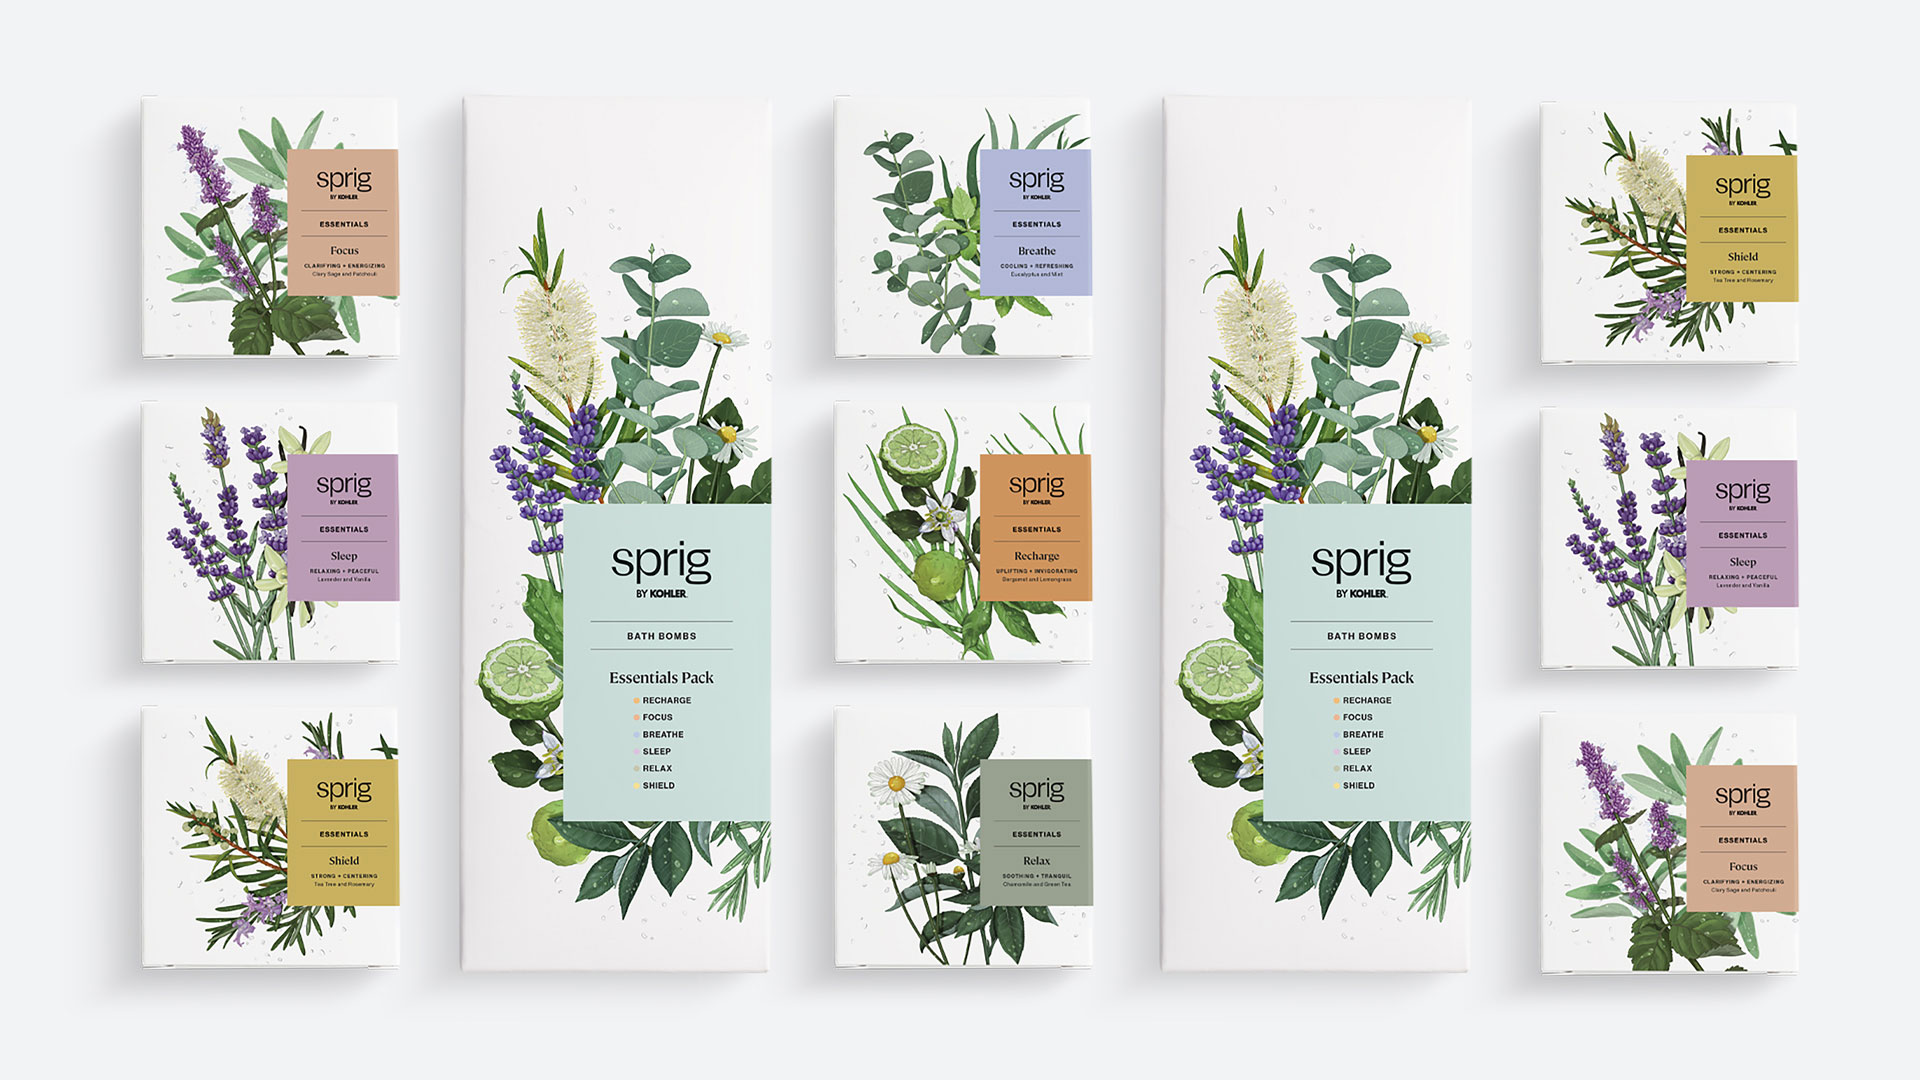 Get to know the Sprig necessities with the Essentials Packs of shower infusion pods, bath bombs, and mists. Each sampler pack includes all six of Sprig's signature blends.